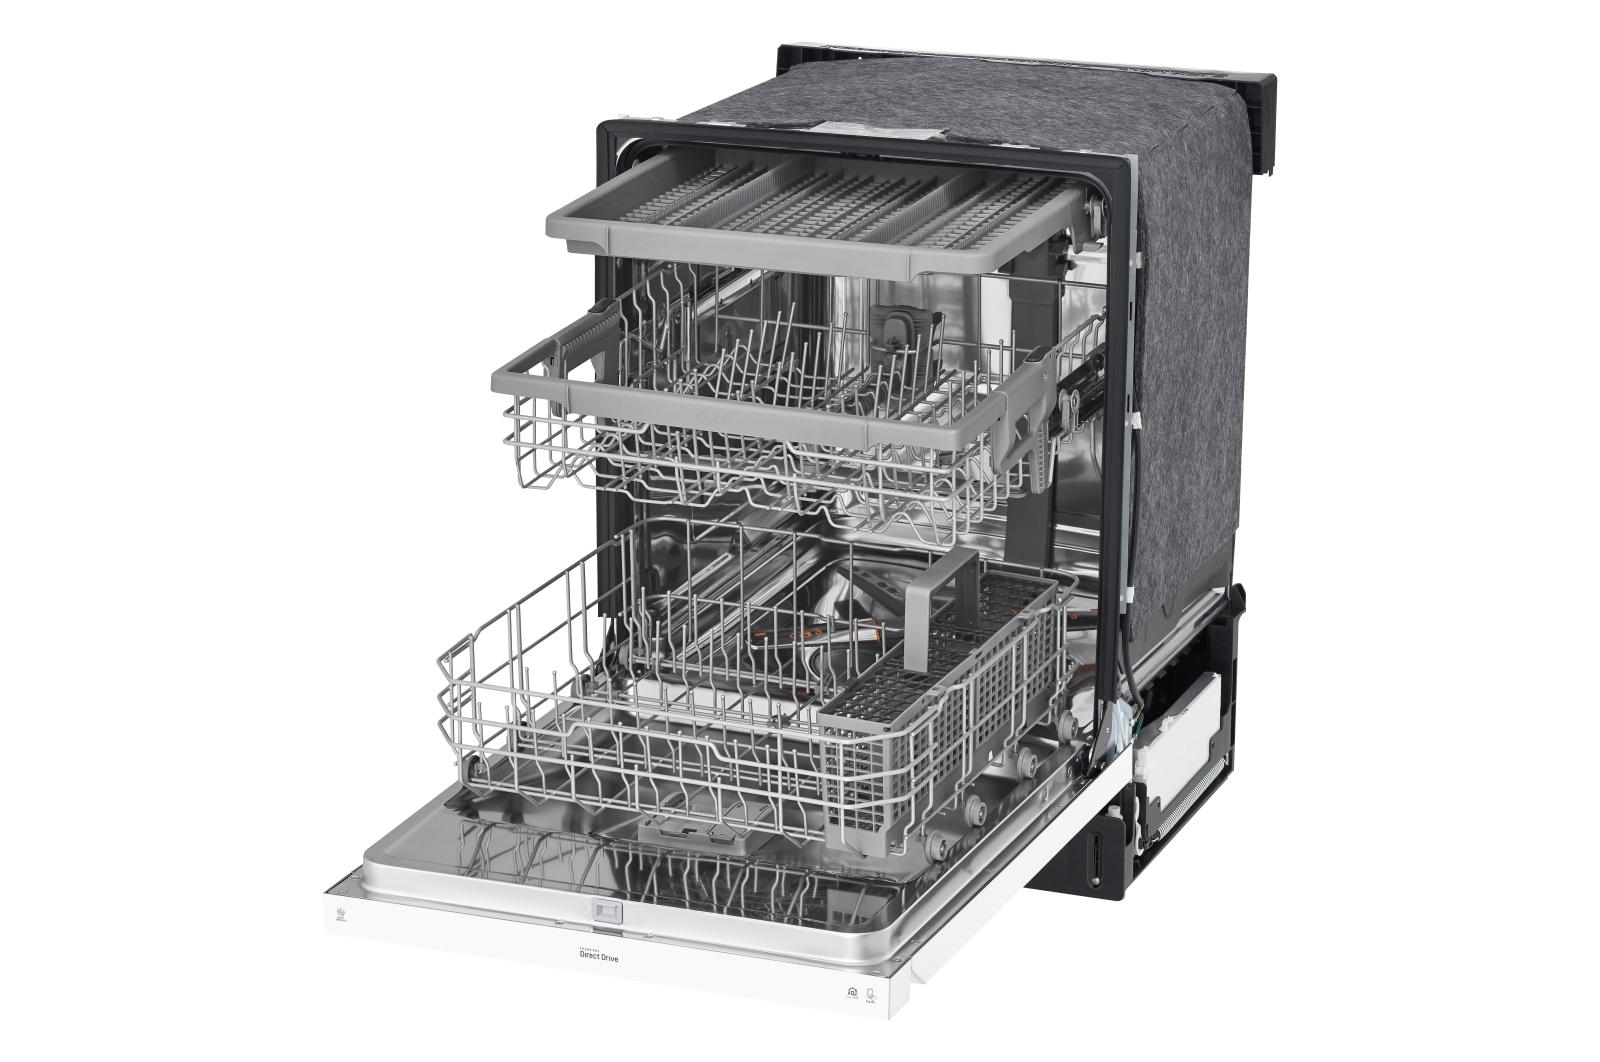 Lg Front Control Dishwasher with QuadWash™ and 3rd Rack